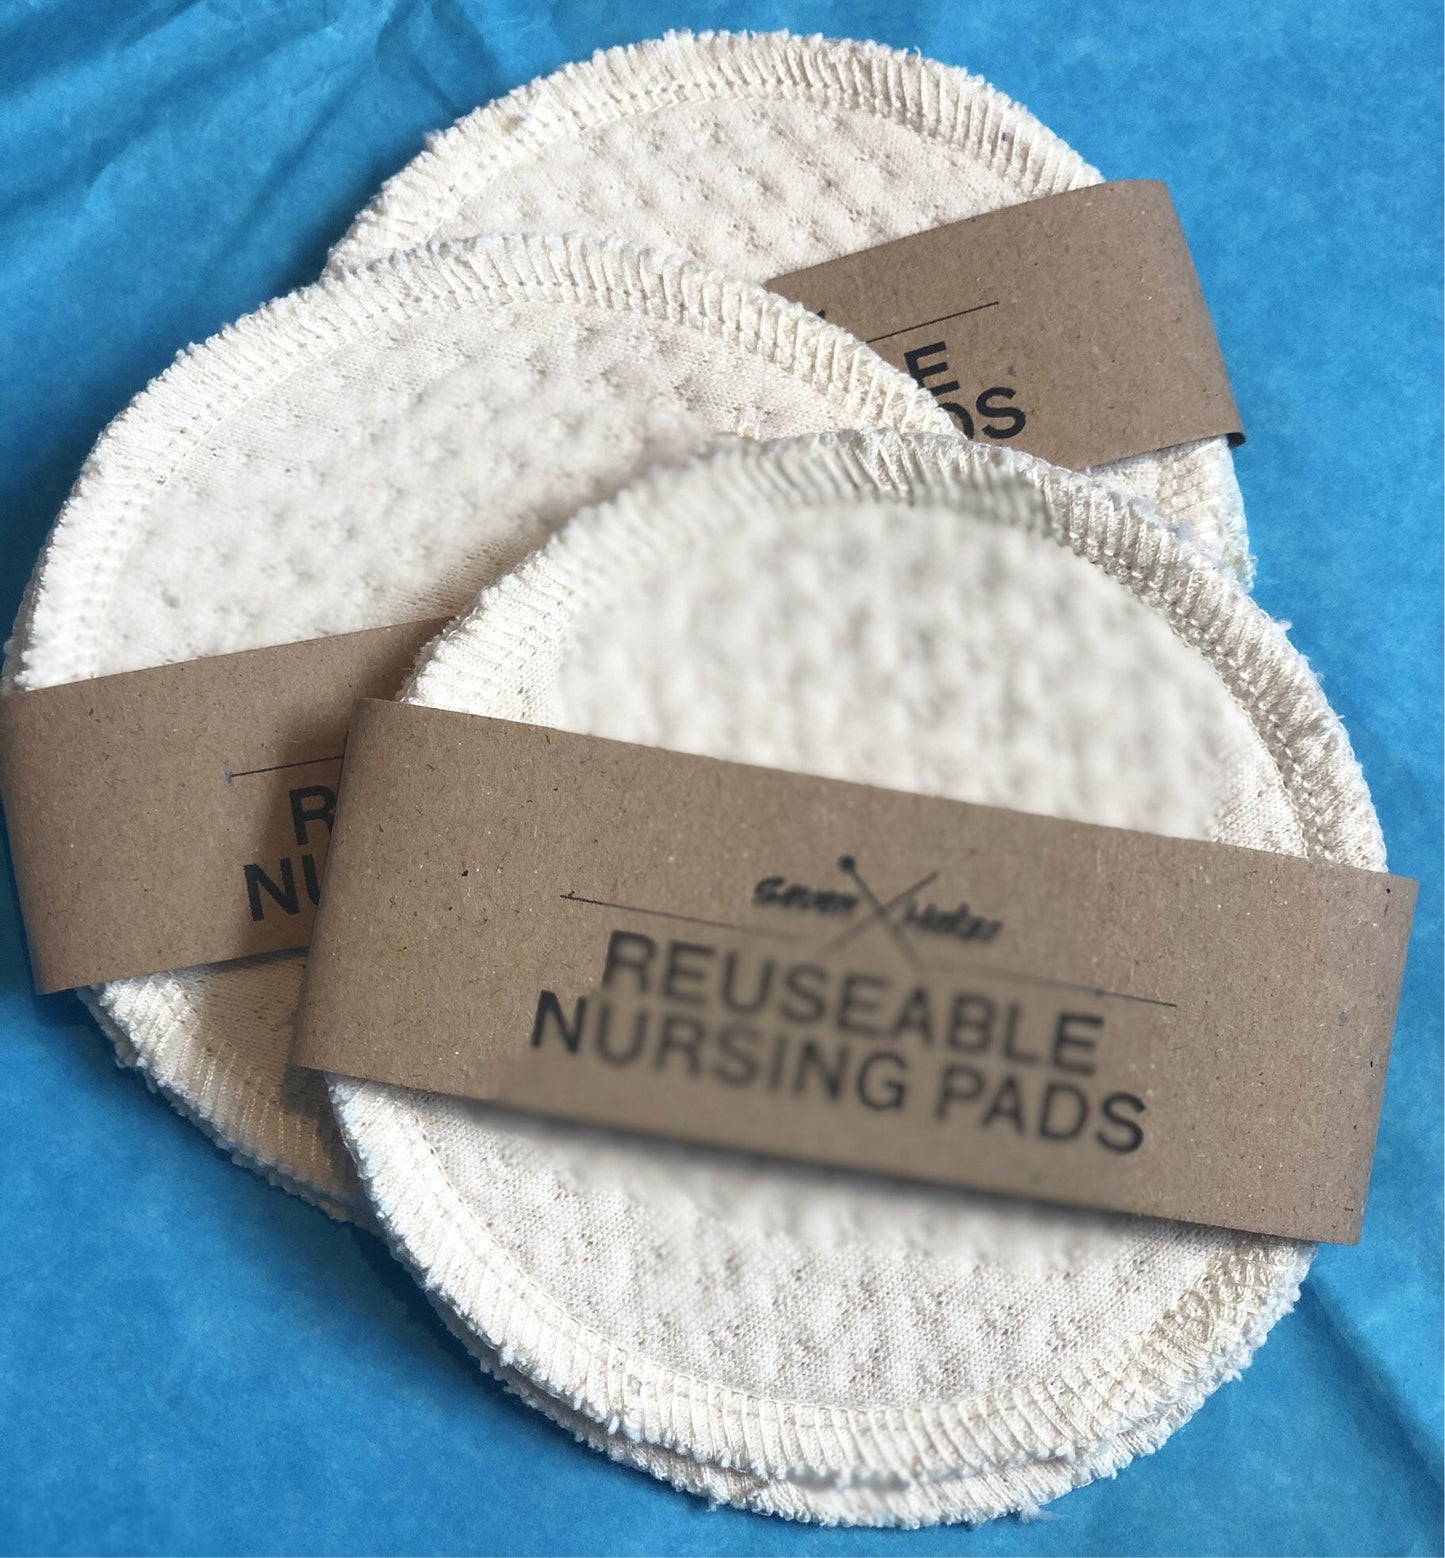 Reusable Nursing Pads - ultra absorbent washable pads for breast feeding